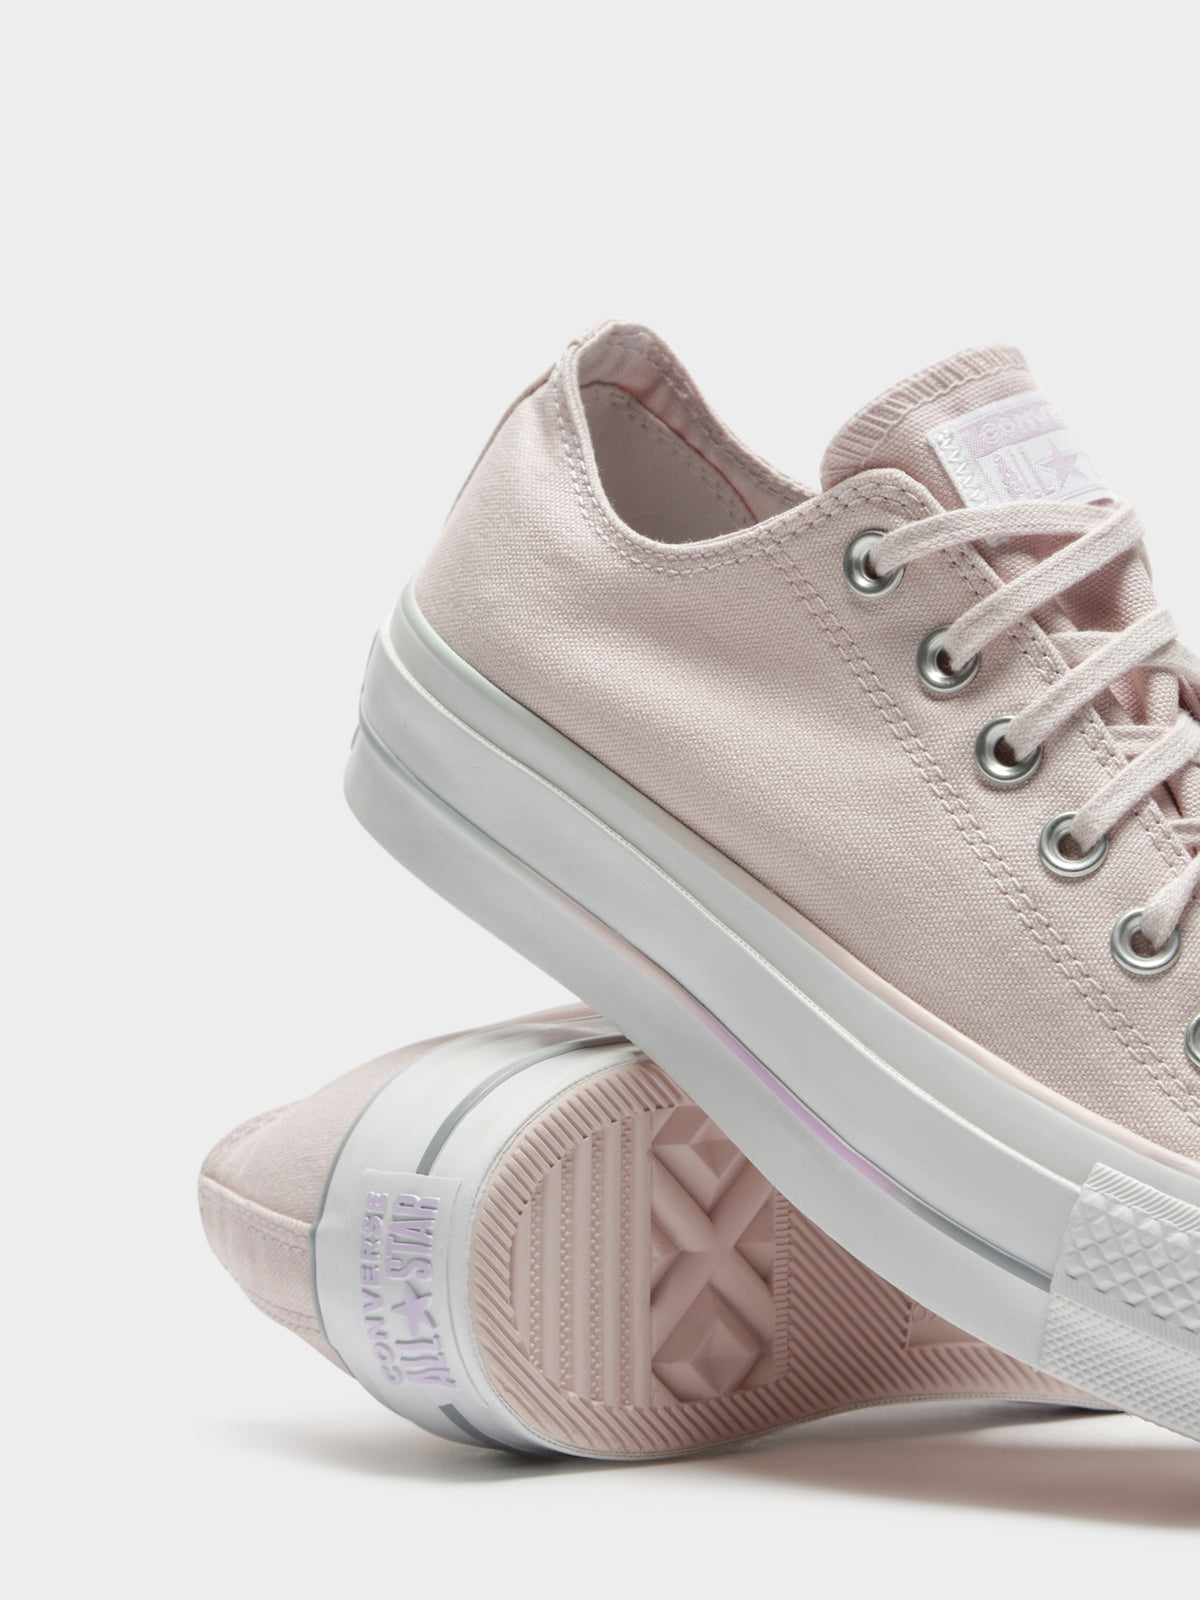 Womens Chuck Taylor All Star Lift Sneakers in Barley Rose &amp; White